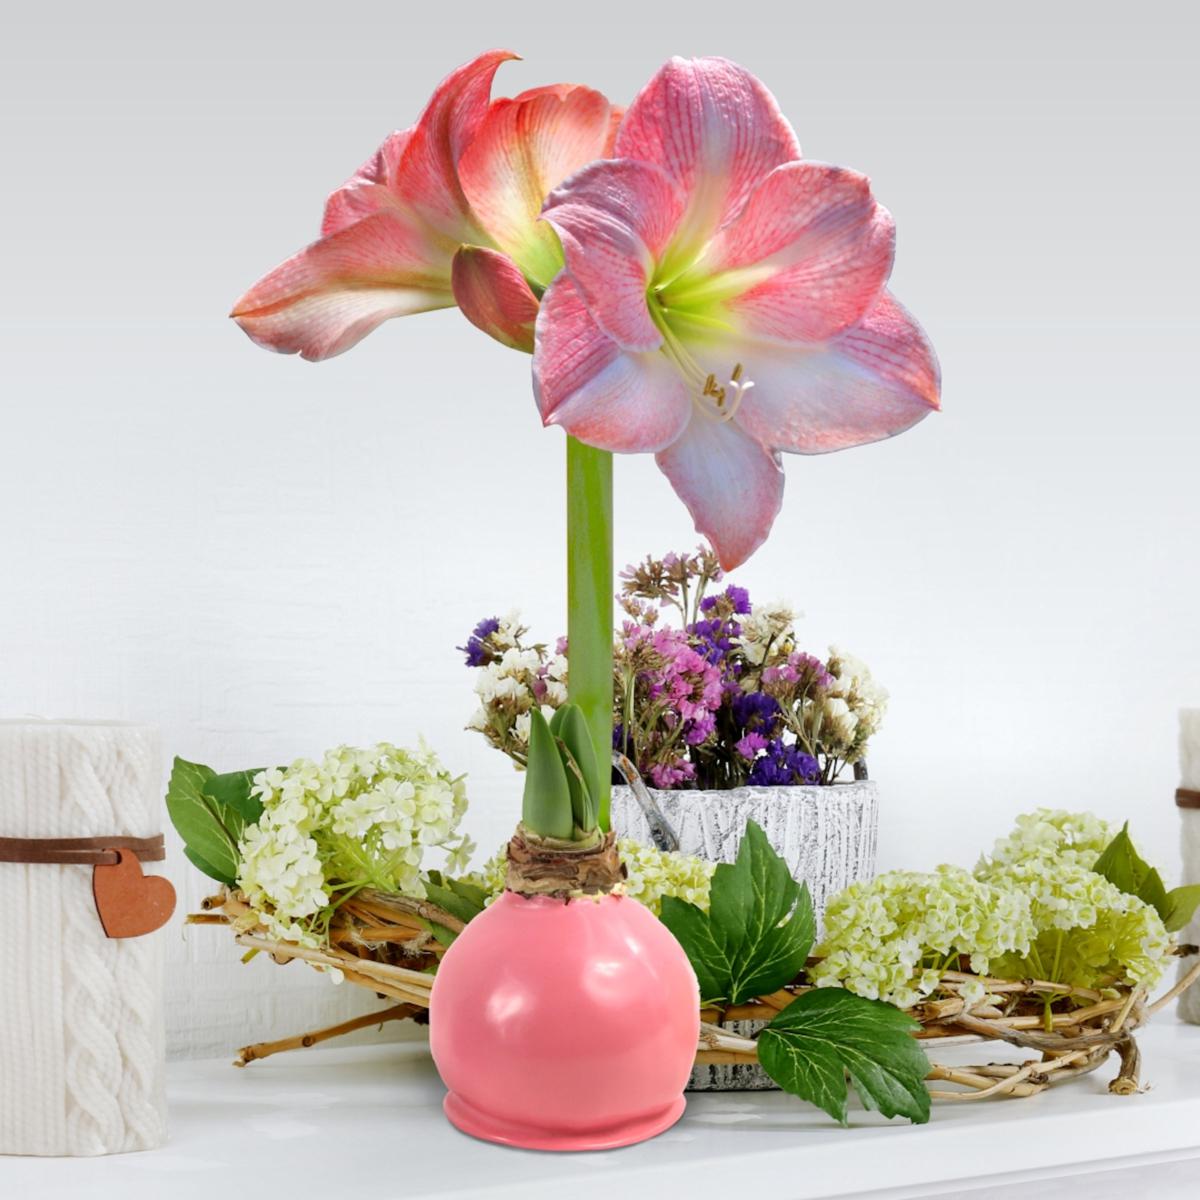 White and pink bloomed Amaryllis bulbs covered in light pink wax.